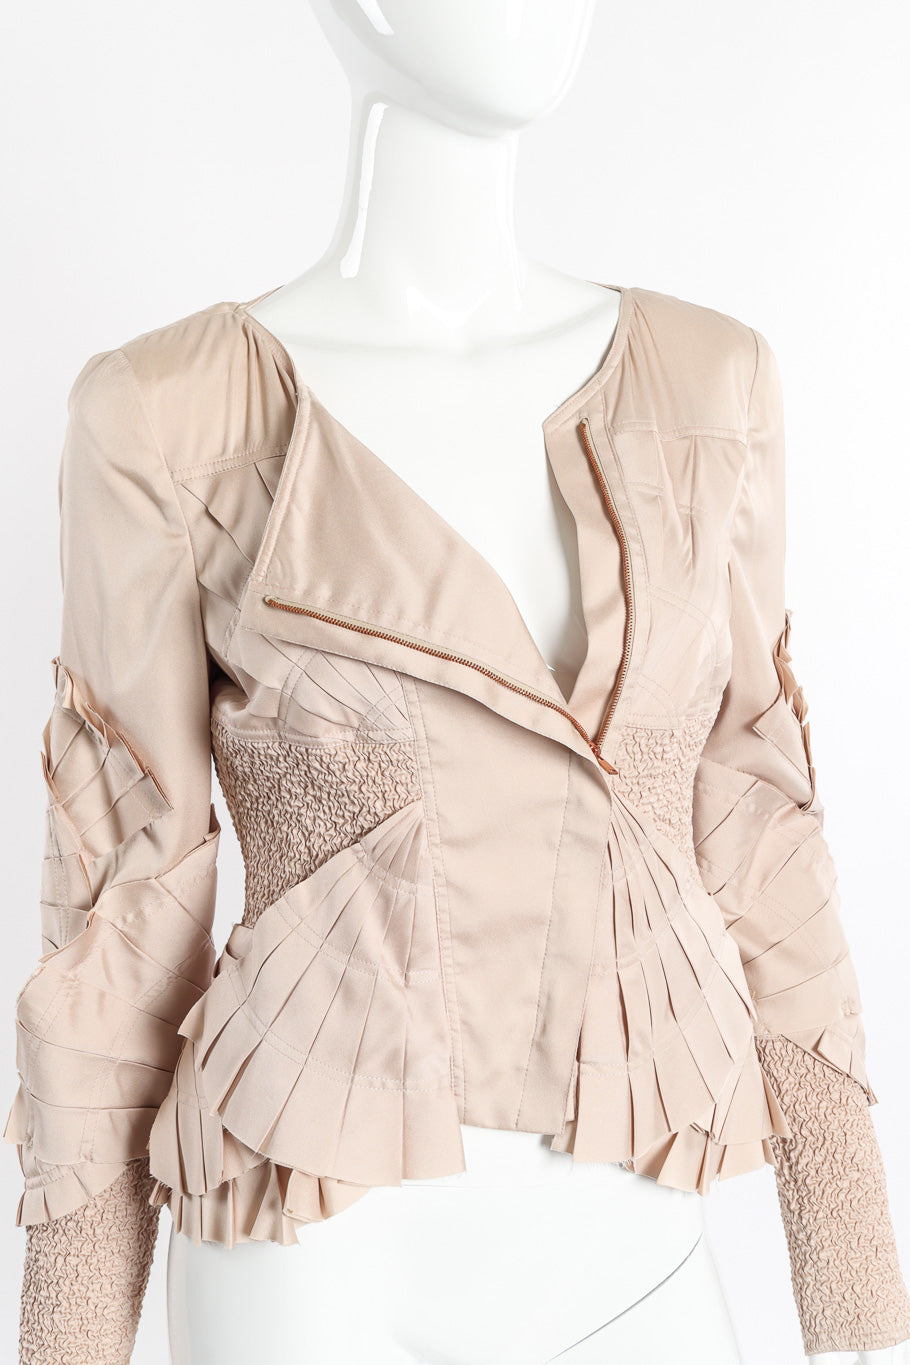 Silk jacket by Gucci on mannequin neck unzipped close  @recessla